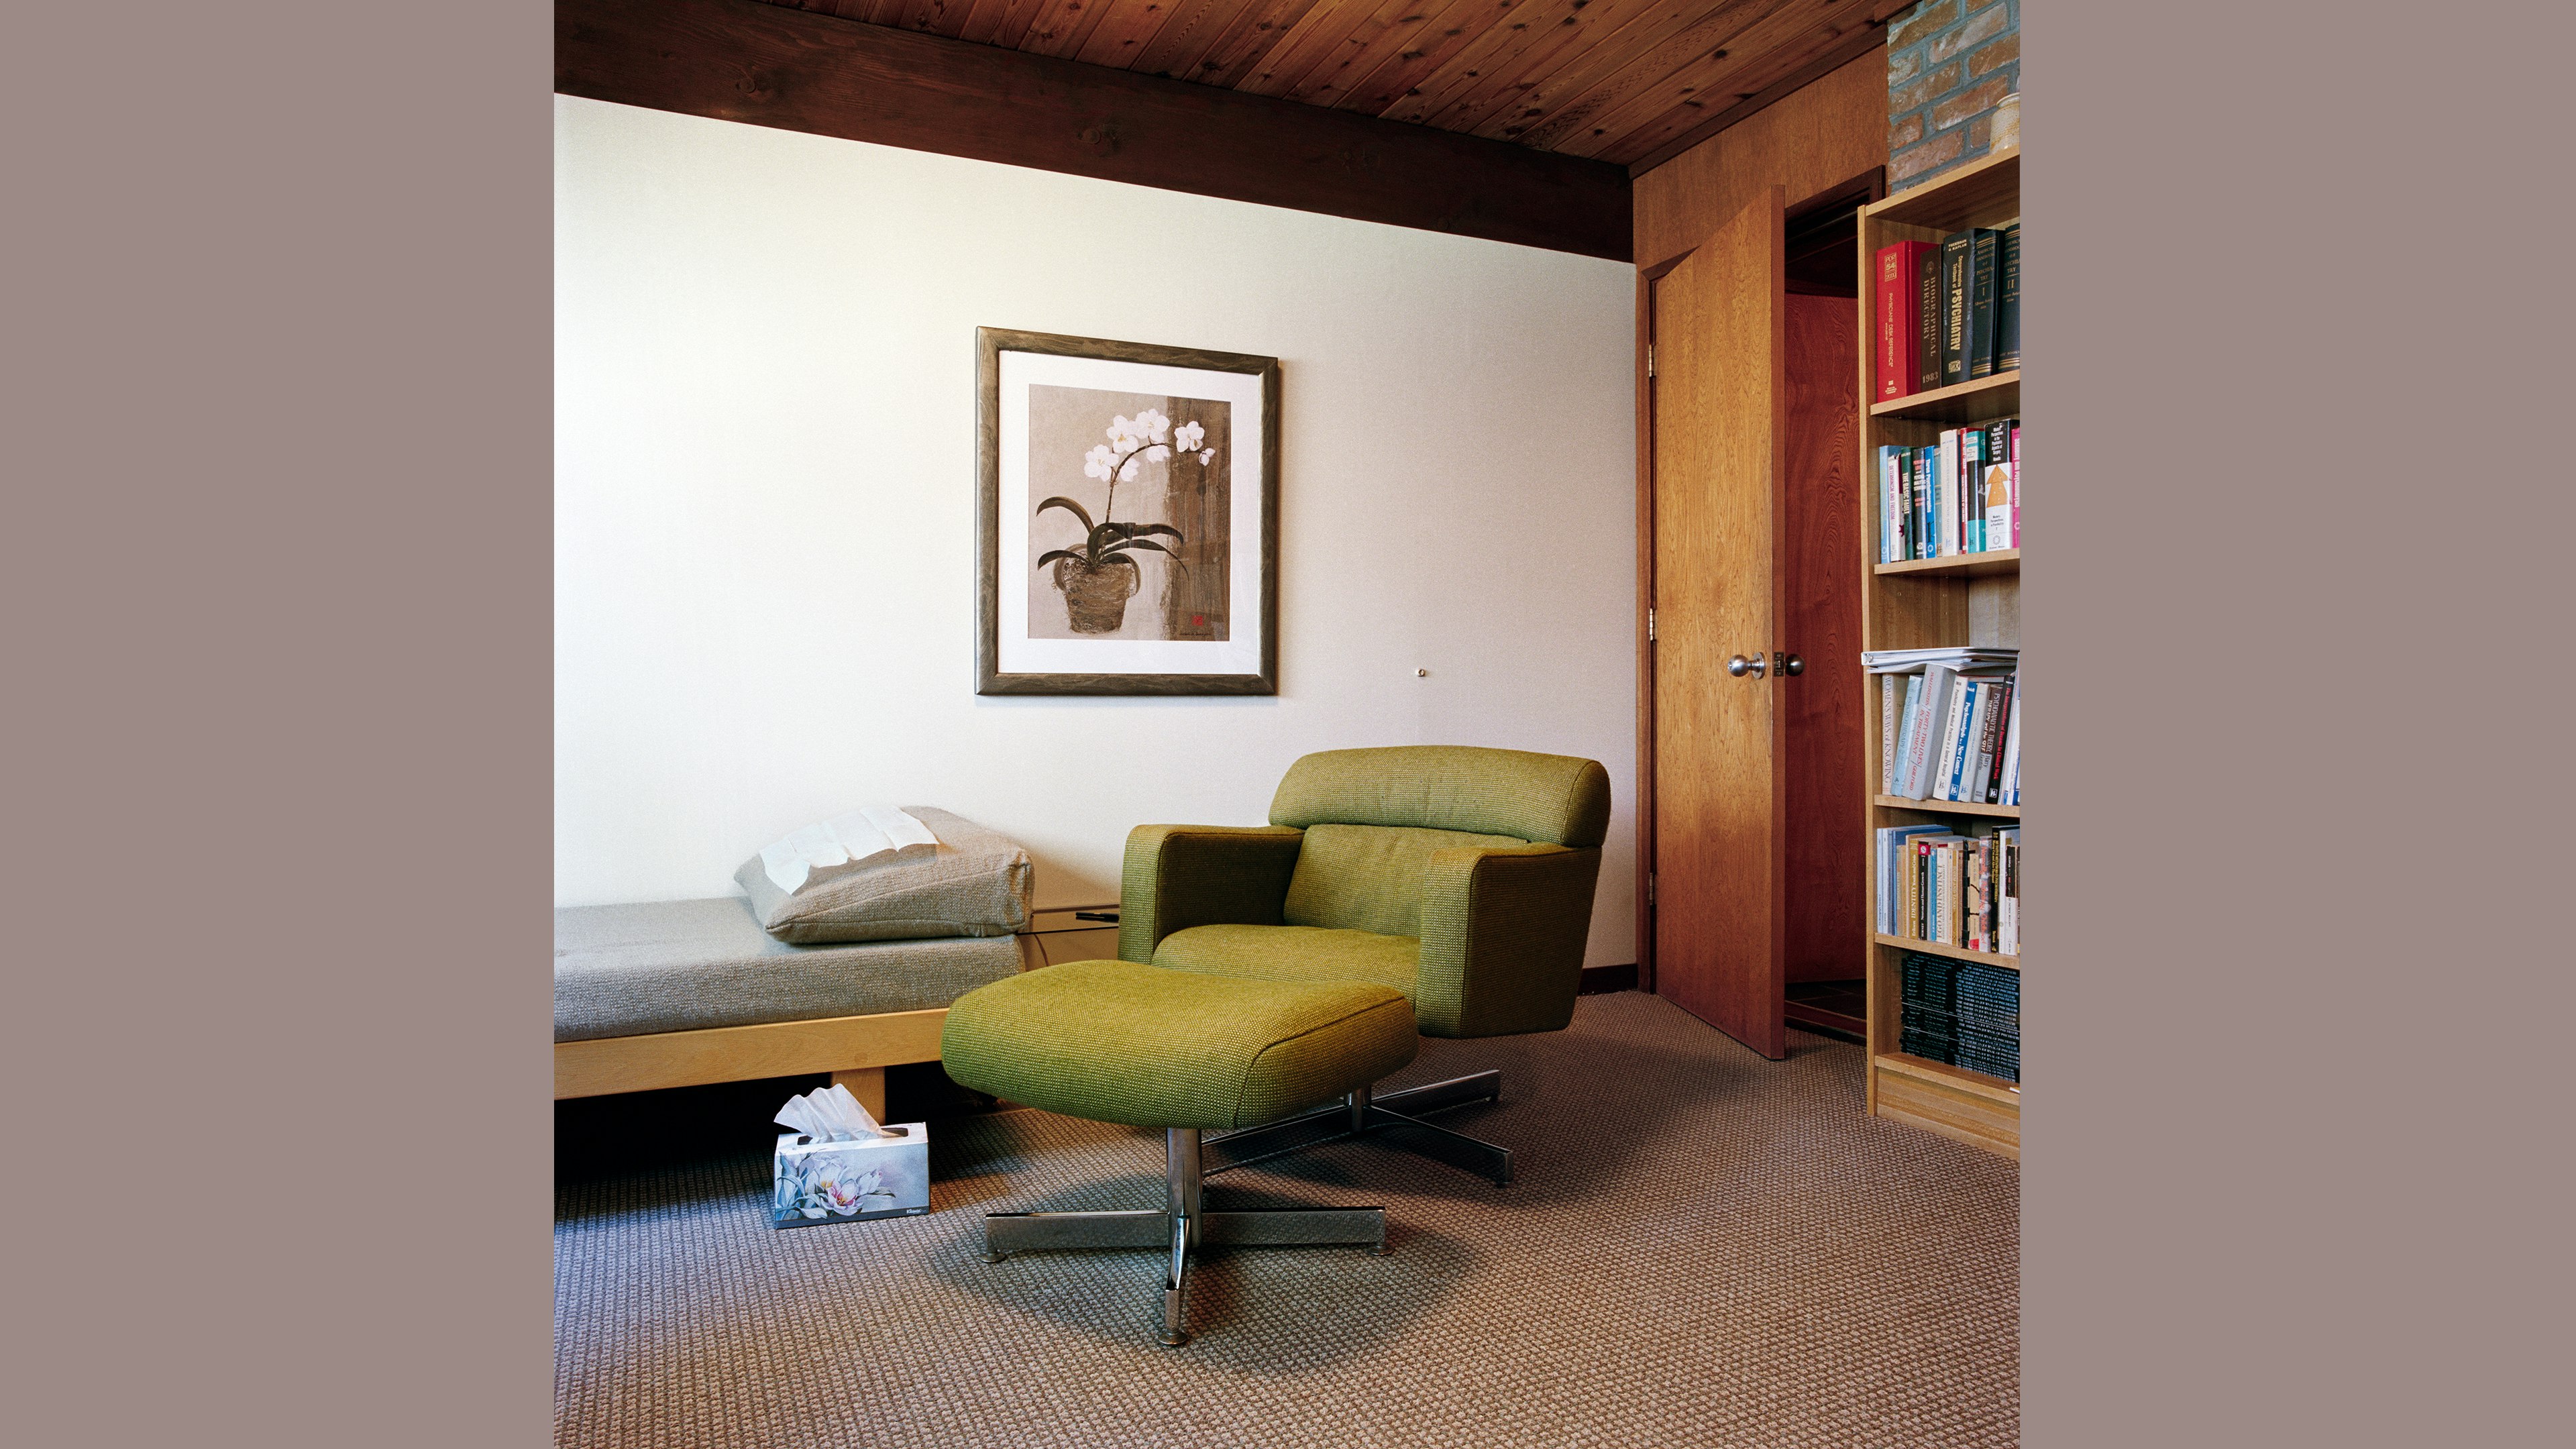 A therapists's office with a daybed, a midcentury modern chair, and a box of tissues